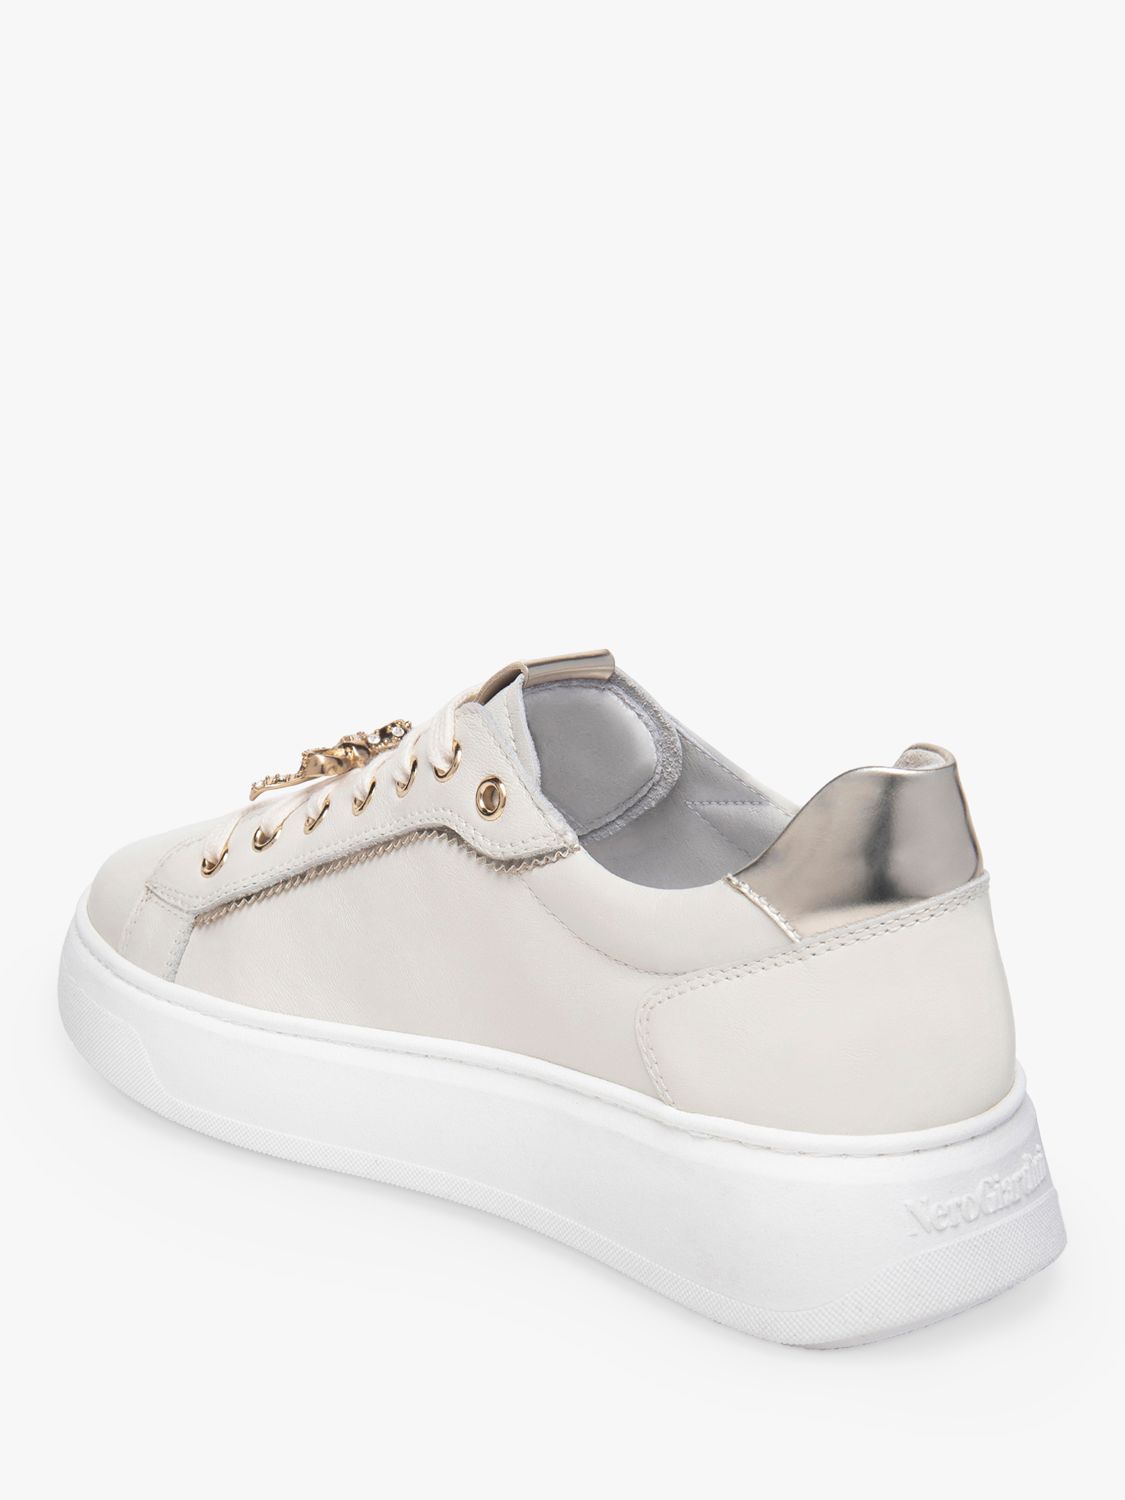 Buy NeroGiardini Leather Low Top Trainers Online at johnlewis.com